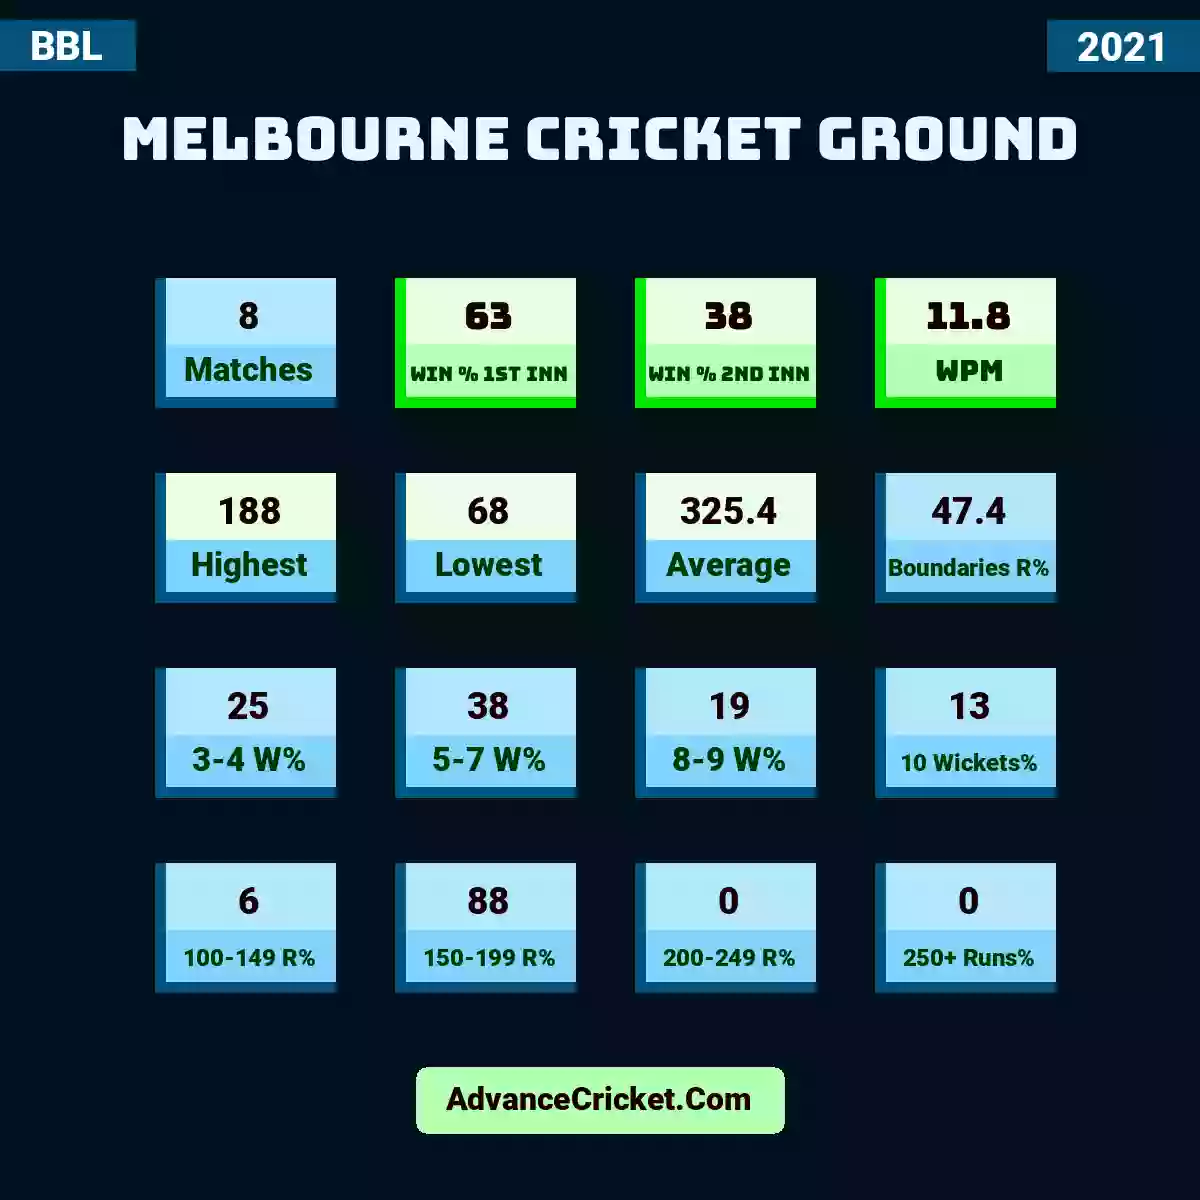 Image showing Melbourne Cricket Ground with Matches: 8, Win % 1st Inn: 63, Win % 2nd Inn: 38, WPM: 11.8, Highest: 188, Lowest: 68, Average: 325.4, Boundaries R%: 47.4, 3-4 W%: 25, 5-7 W%: 38, 8-9 W%: 19, 10 Wickets%: 13, 100-149 R%: 6, 150-199 R%: 88, 200-249 R%: 0, 250+ Runs%: 0.